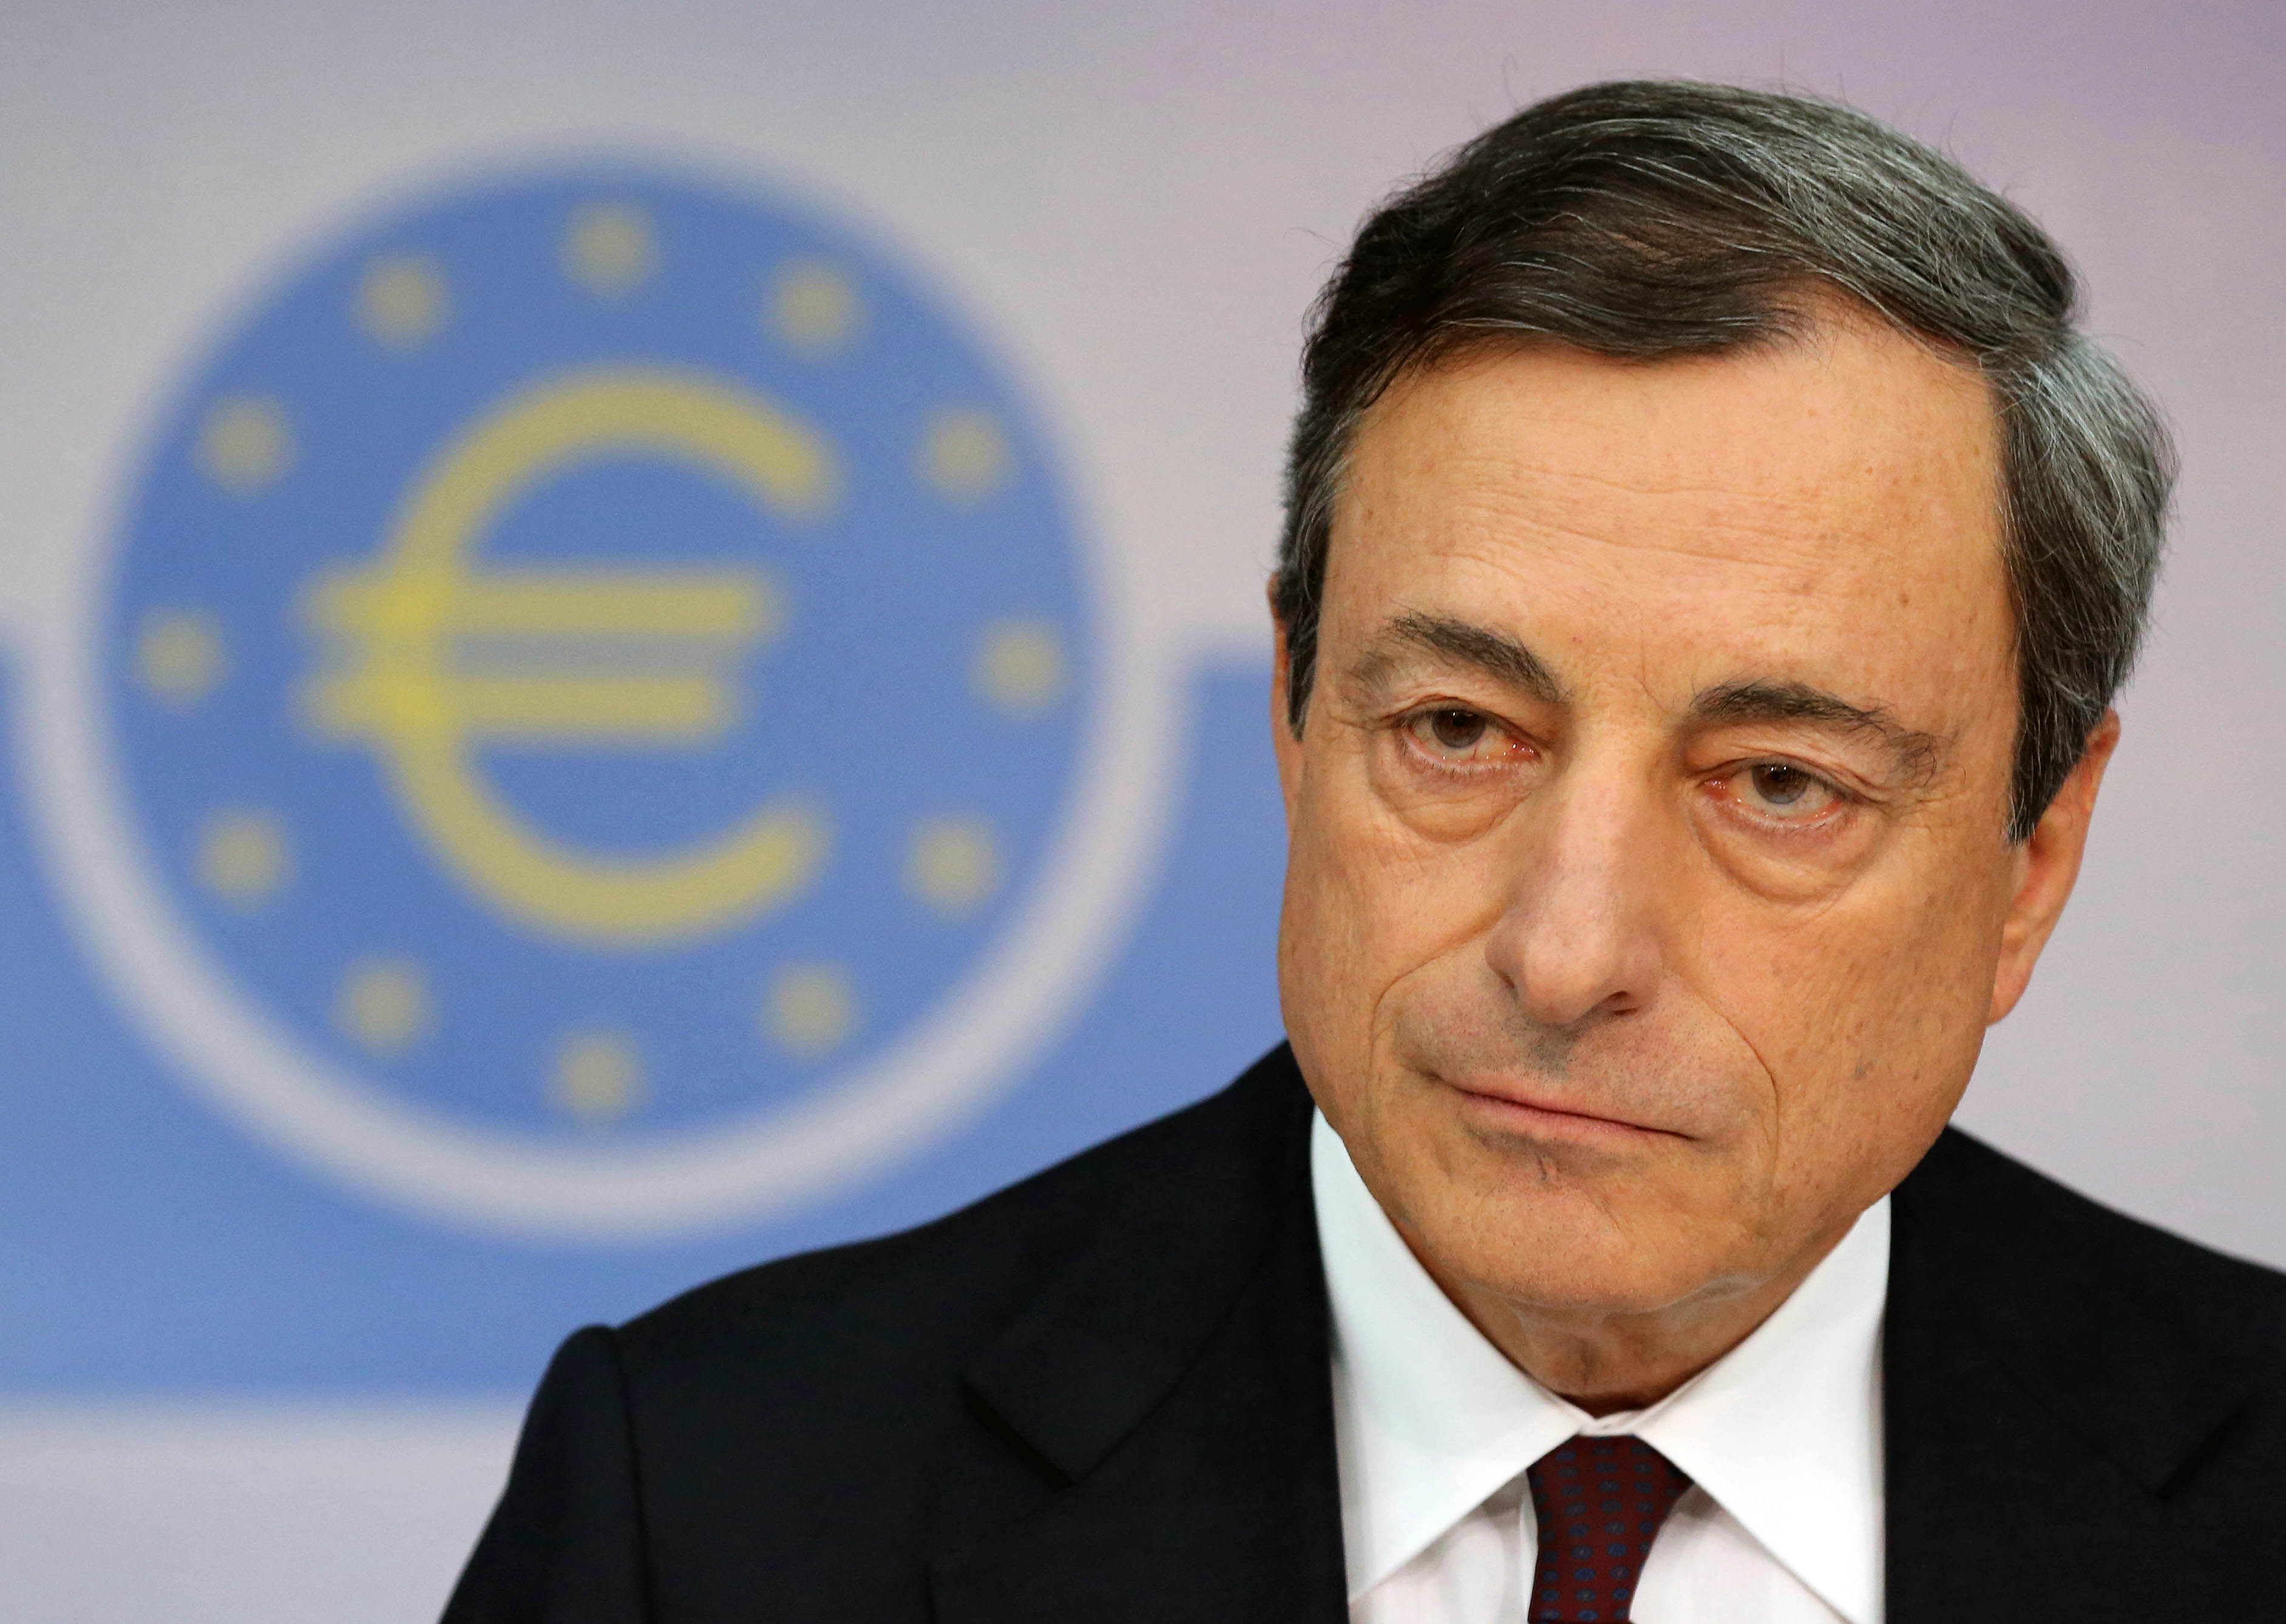 European Central Bank (ECB) president Mario Draghi is placing more of an emphasis on fiscal stimulus than austerity. Photo: Xinhua